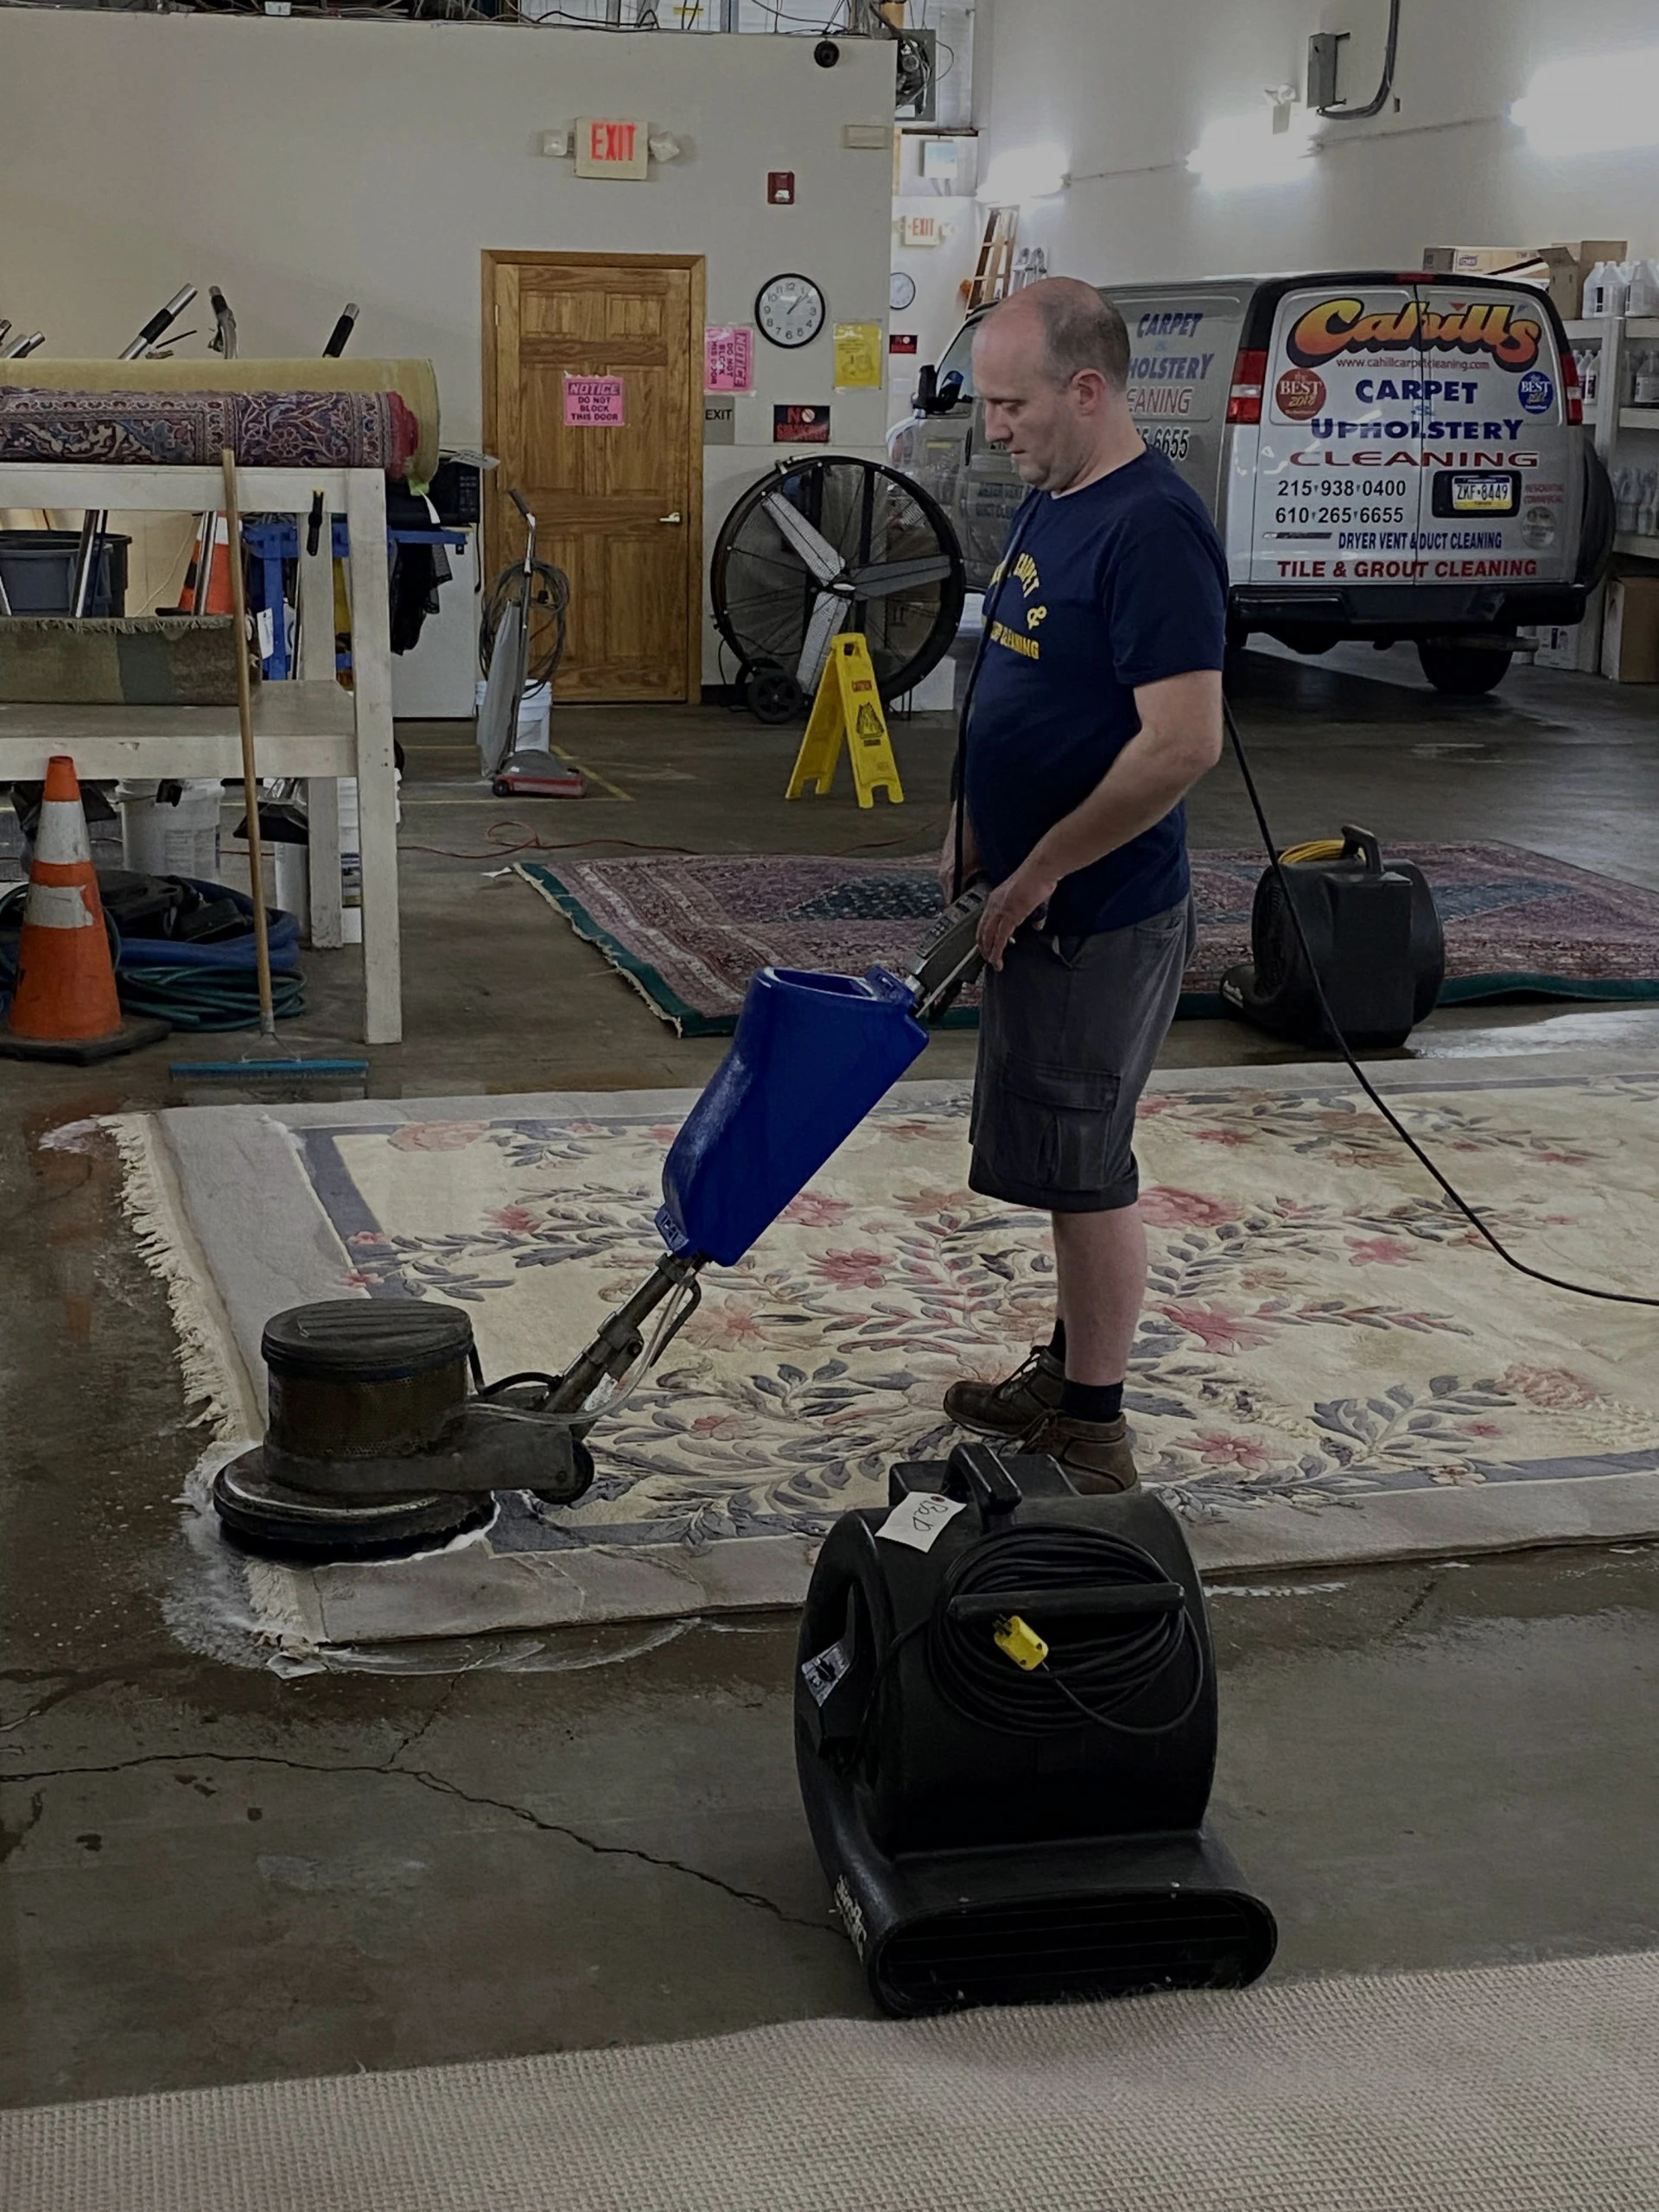 Carpet Cleaning at Cahill's Carpet